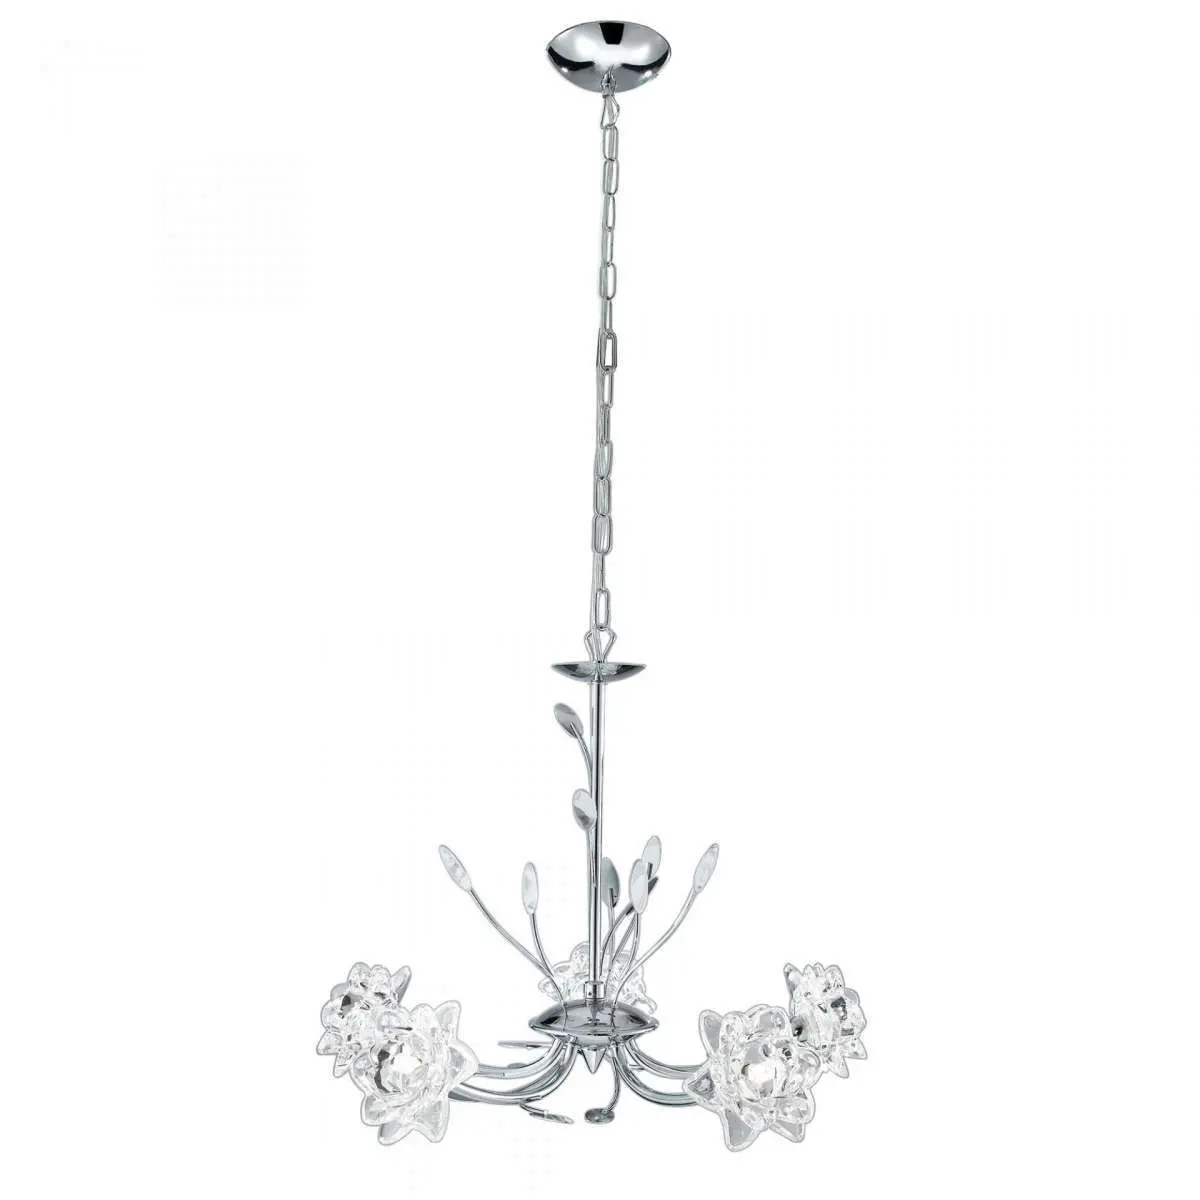 Bellis Chrome 5 Light Fitting with Clear Flower Glass